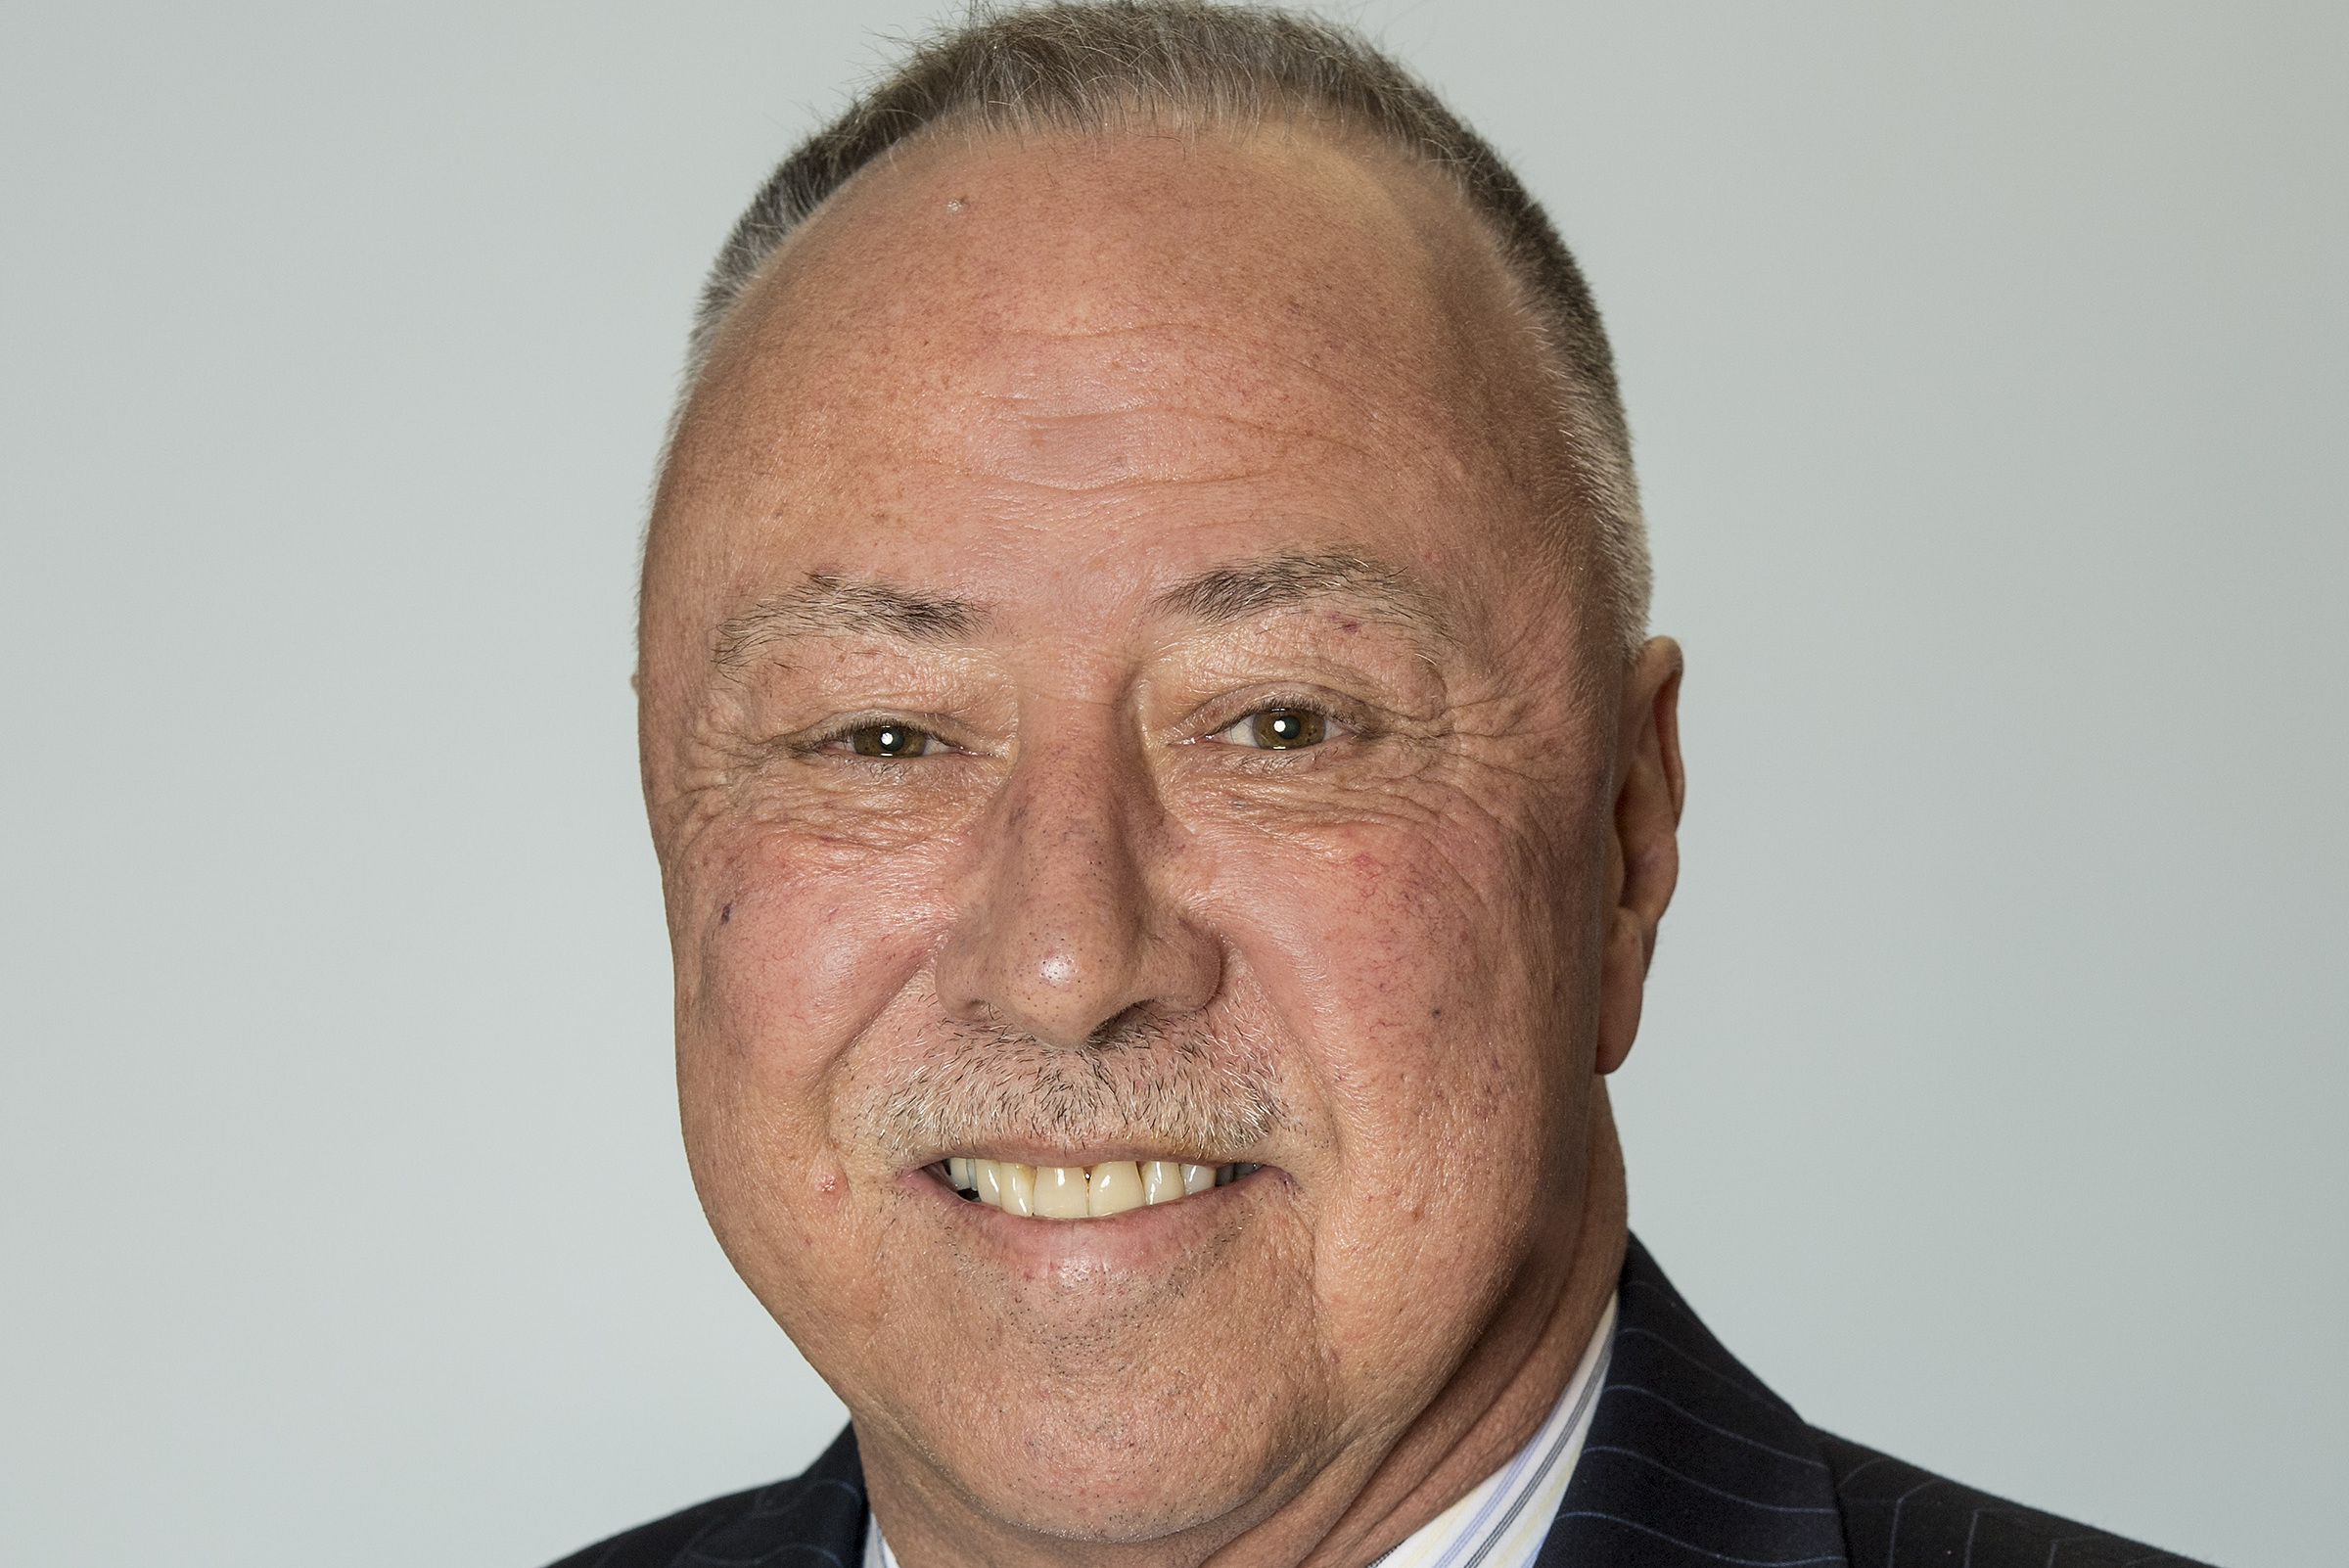 Jerry Remy off Red Sox broadcasts to deal with lung cancer treatments